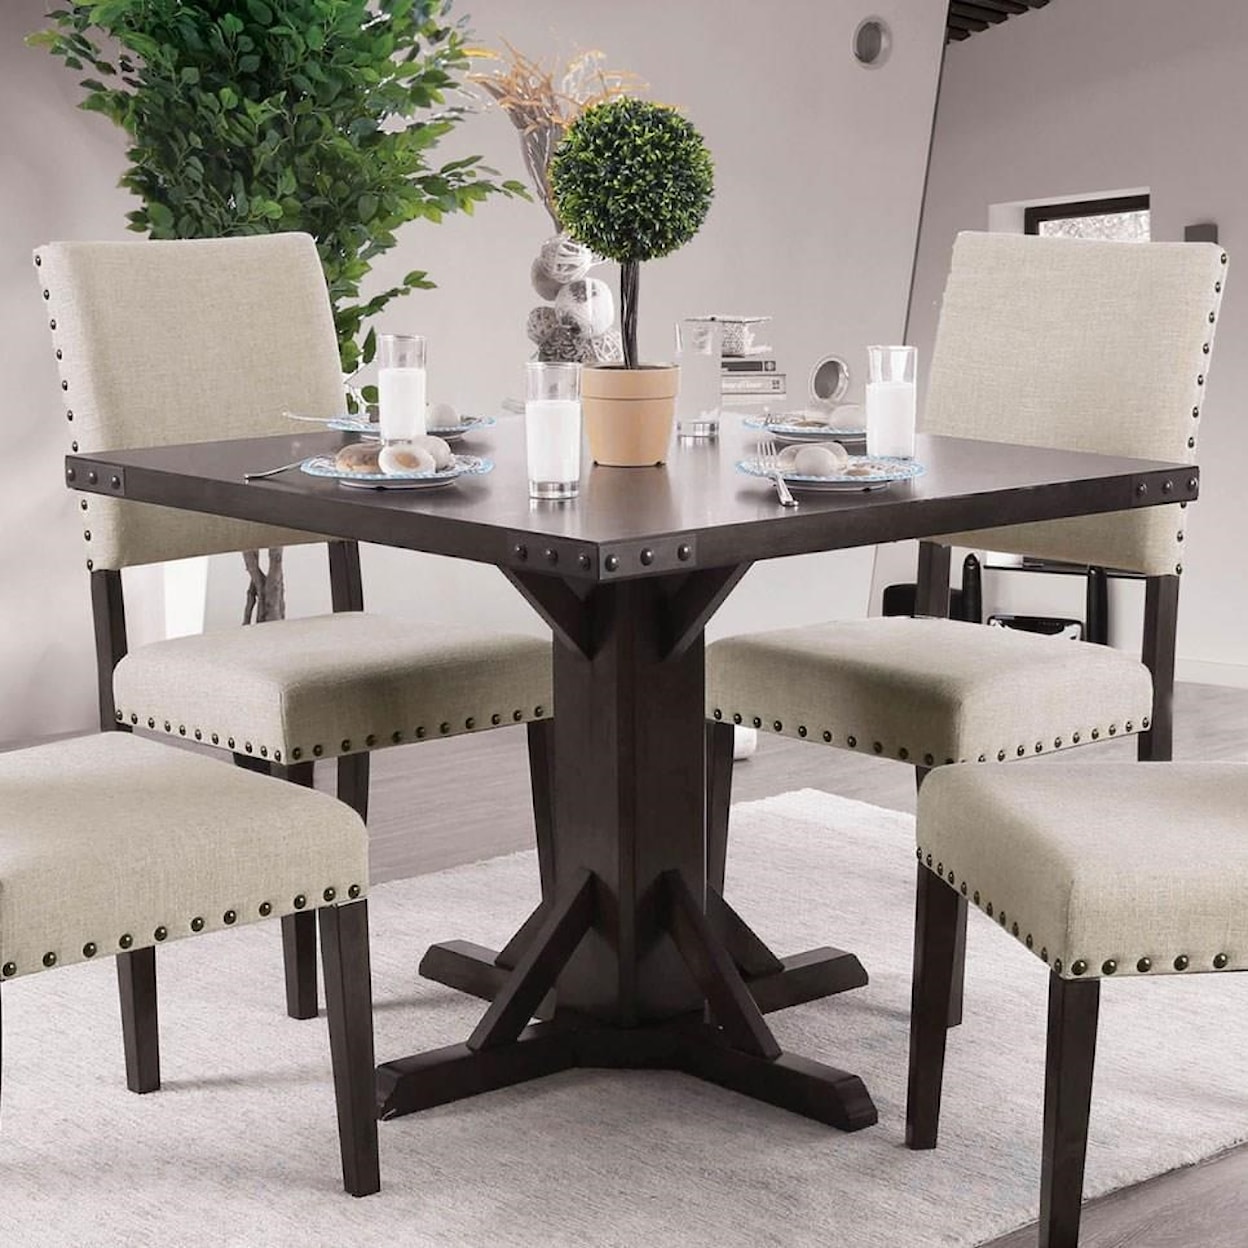 Furniture of America Glenbrook Dining Table